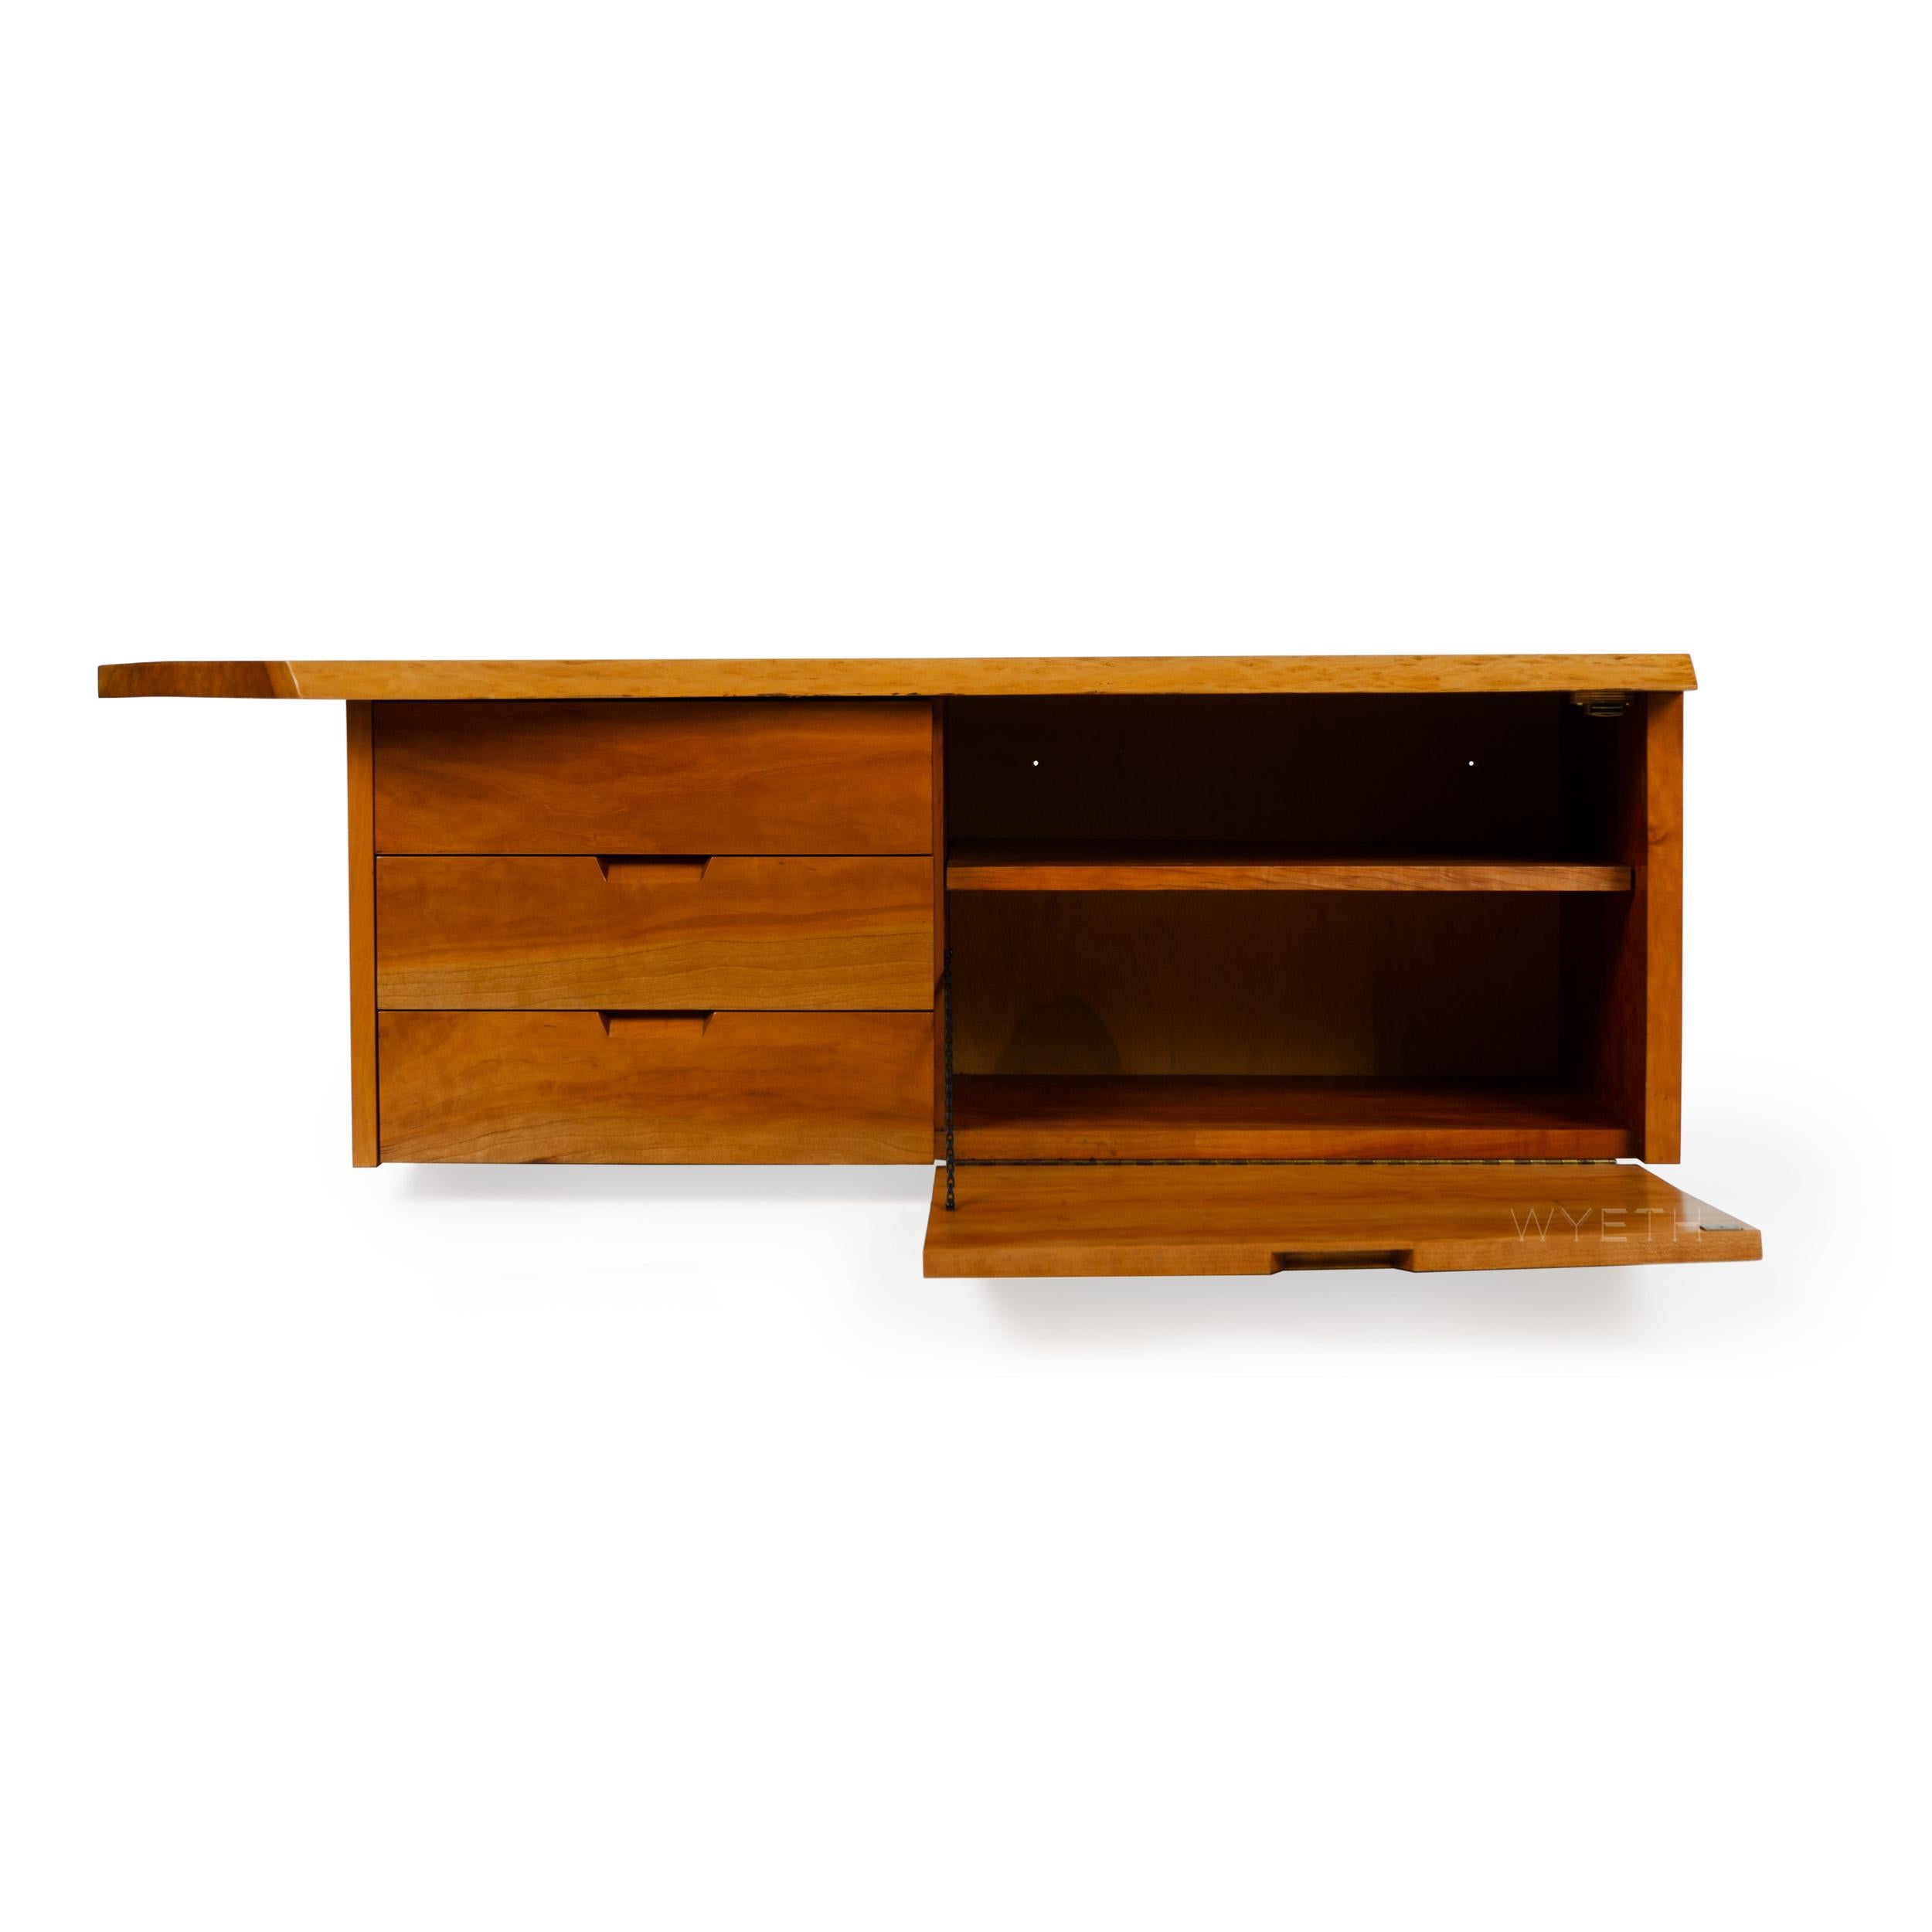 A walnut wall mount cabinet with one drop down door with an adjustable shelf and three (3) drawers, all with integrated handles.